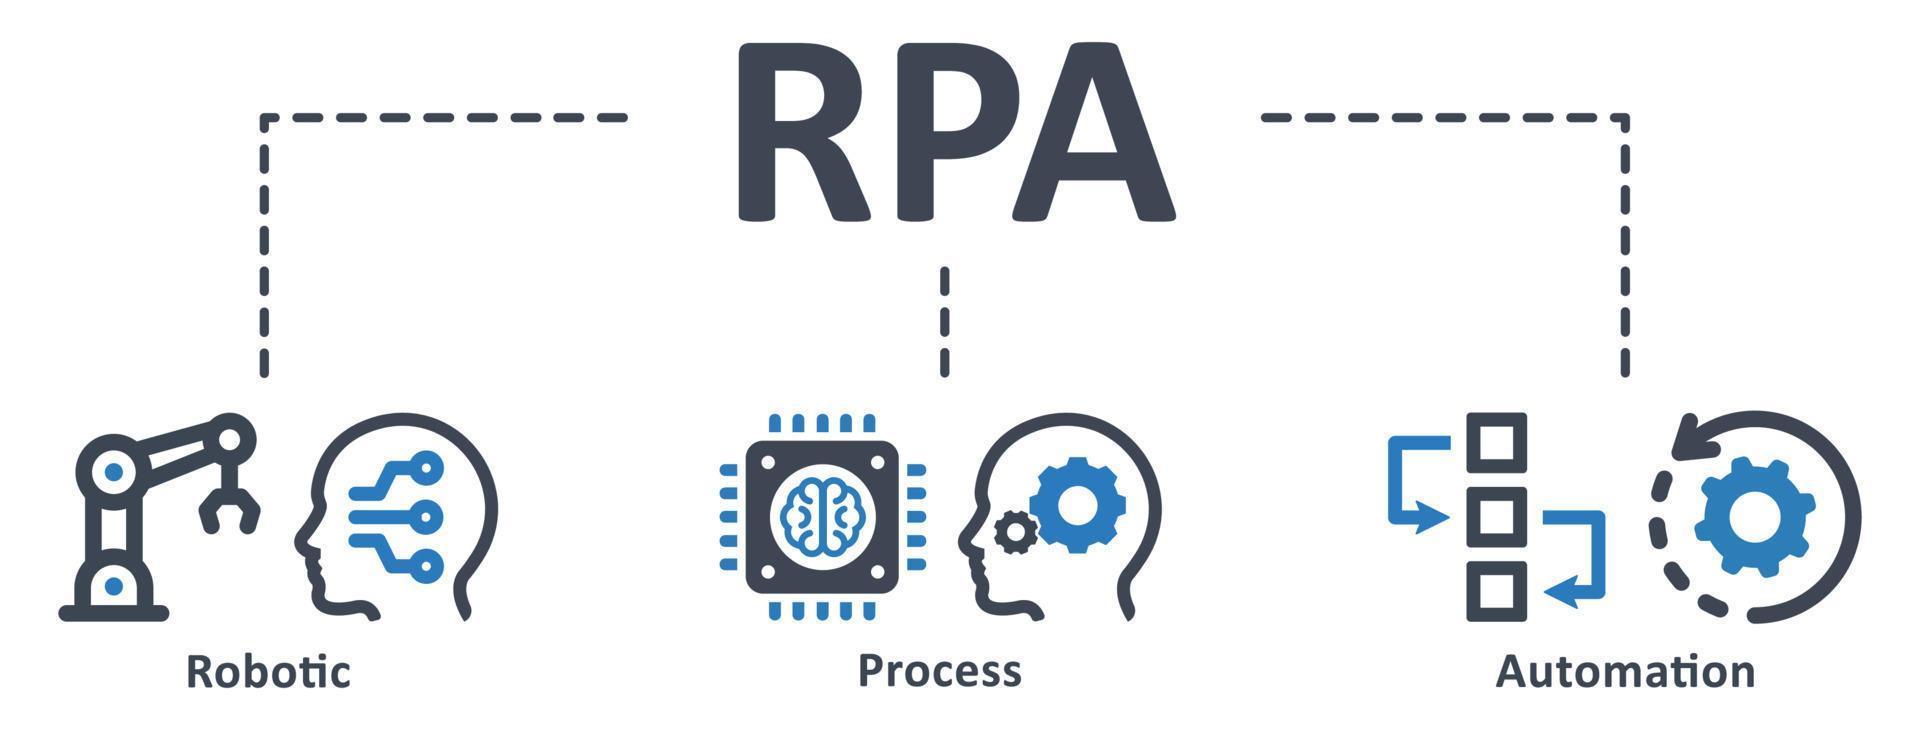 RPA icon - vector illustration . rpa, robotic, process, automation, robot, ai, artificial, intelligence, conveyor, processor, infographic, template, concept, banner, pictogram, icon set, icons .